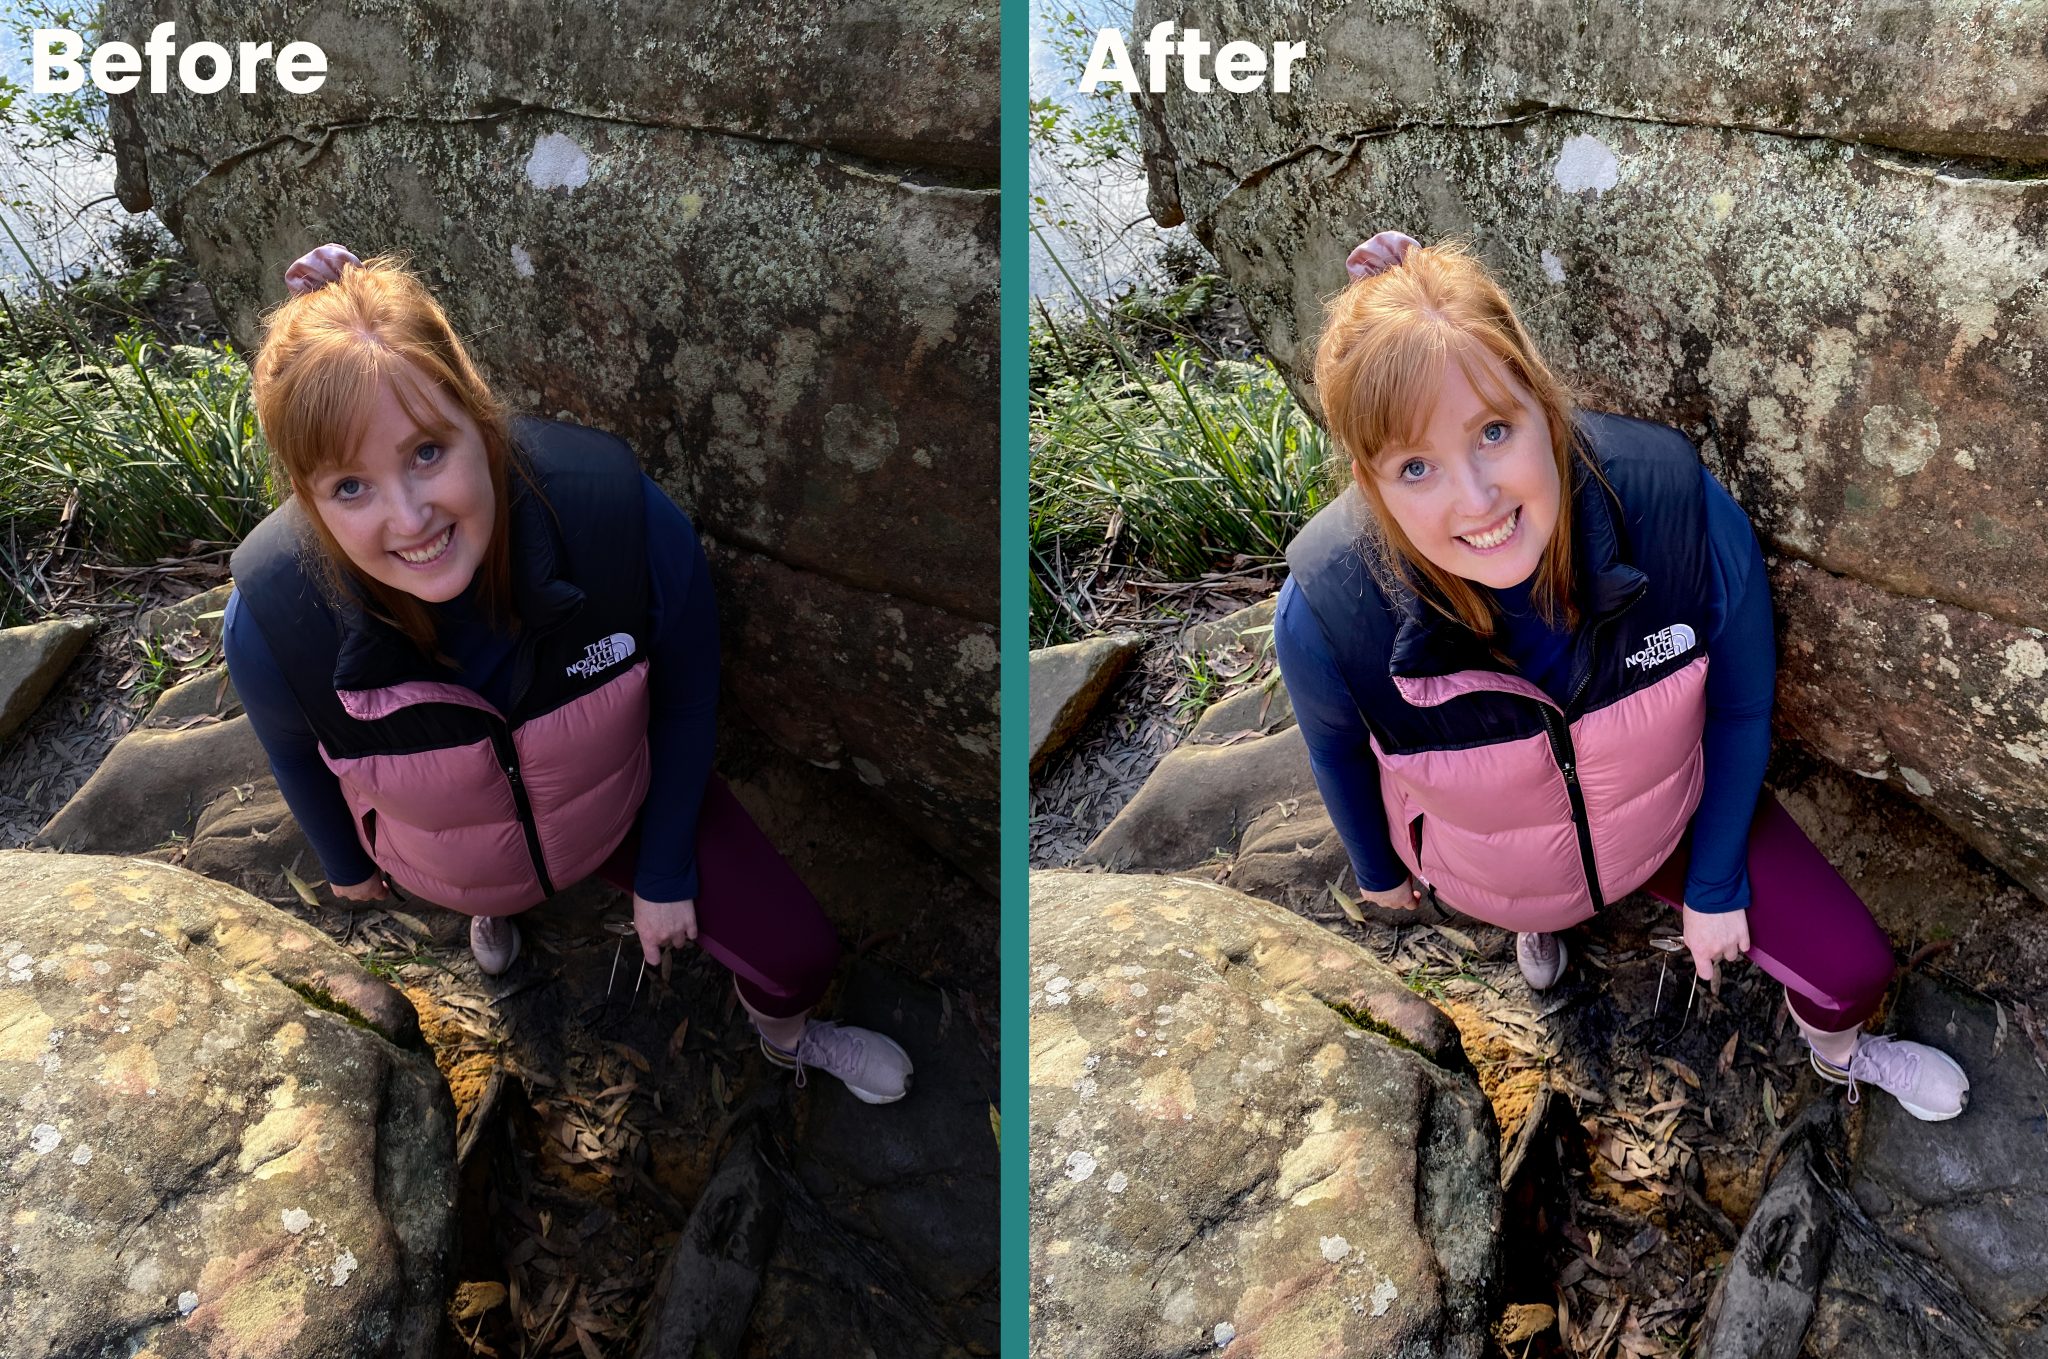 a side by side before and after of a person using a DIY reflector. Photo: Tim Ashelford